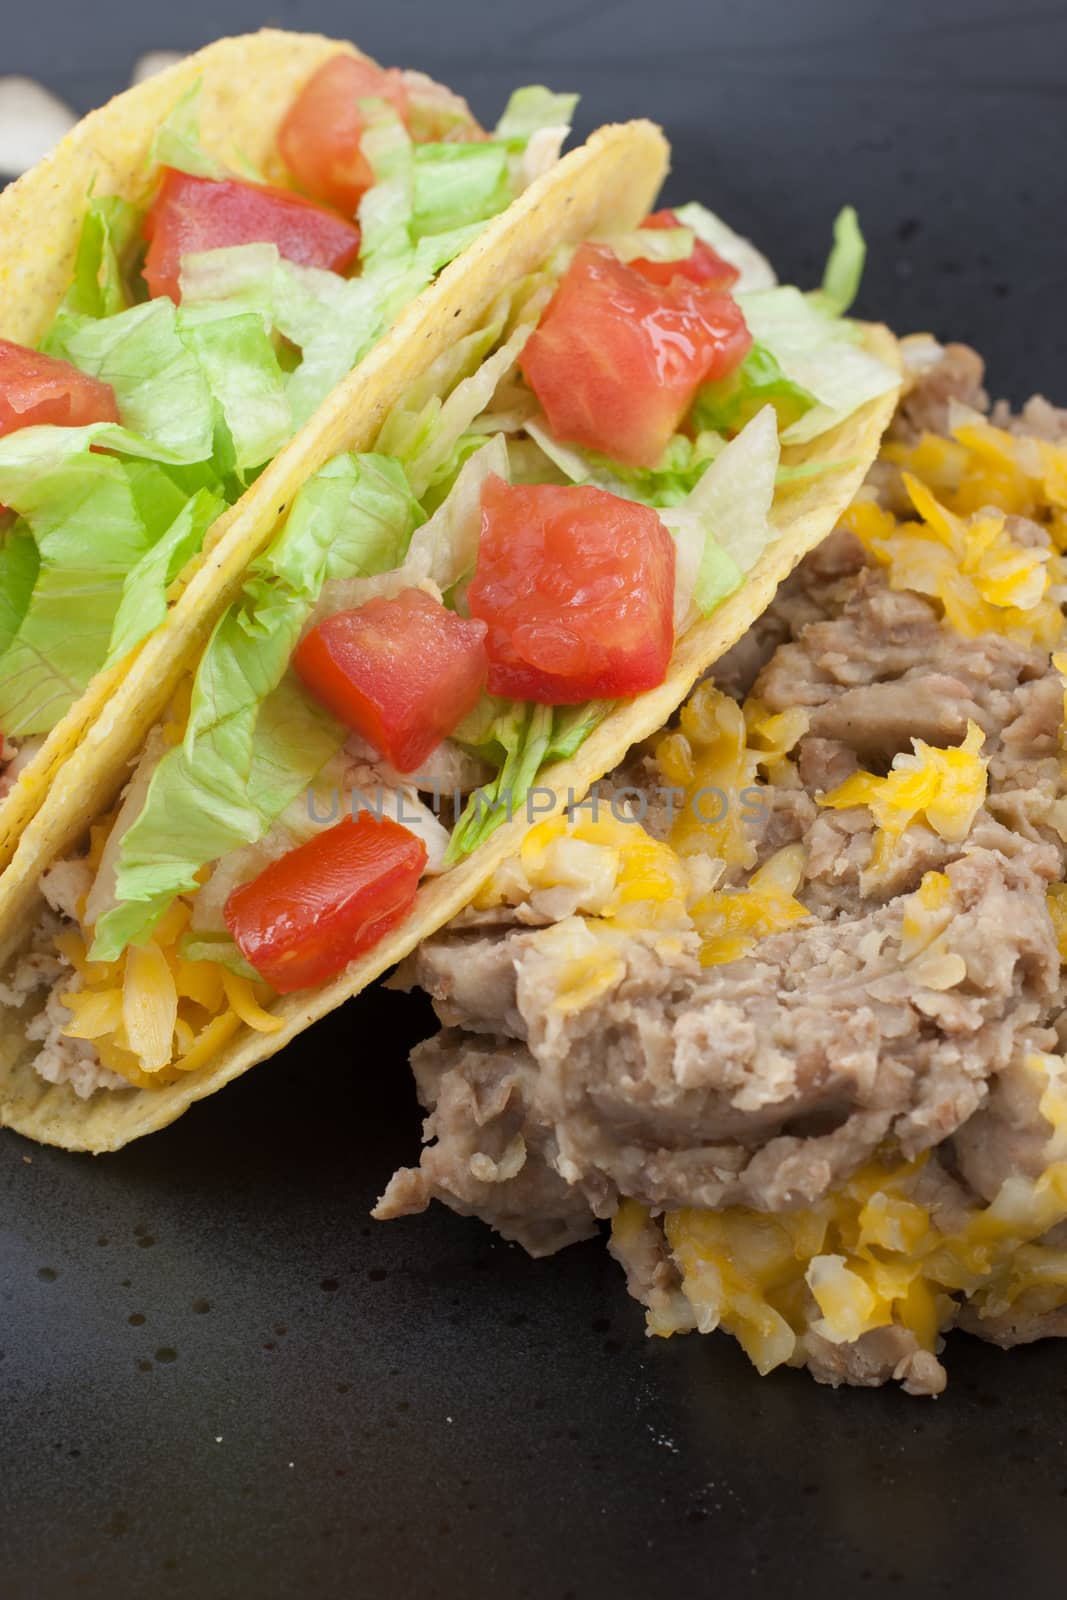 Tacos and Refried Beans by SouthernLightStudios